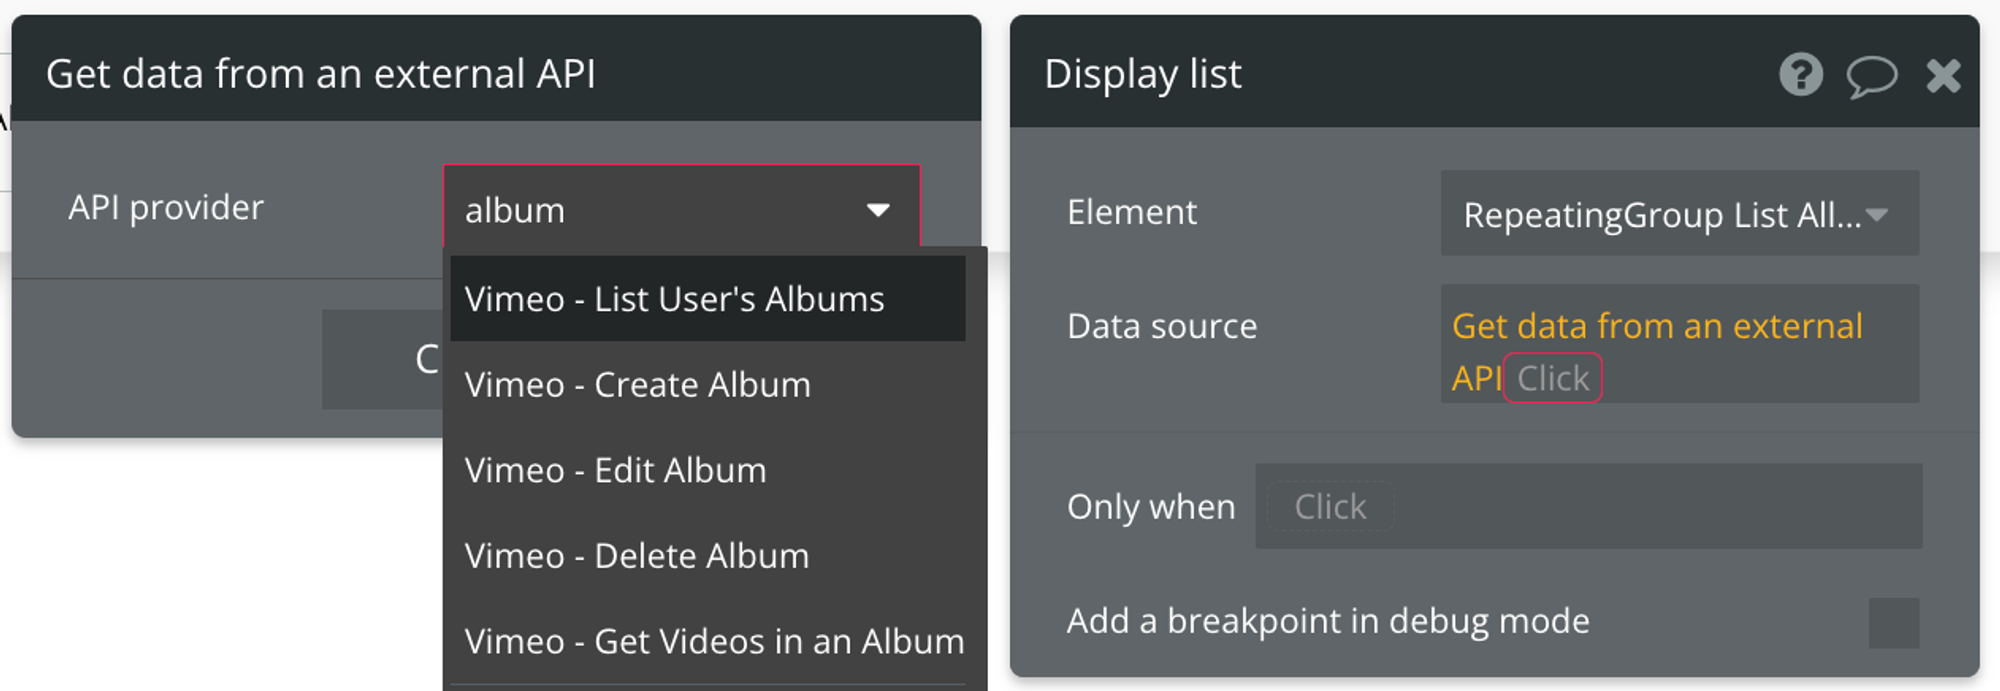 Select "Get data from external API" from the list of data sources, then find Vimeo - List User's Albums from the list of API providers